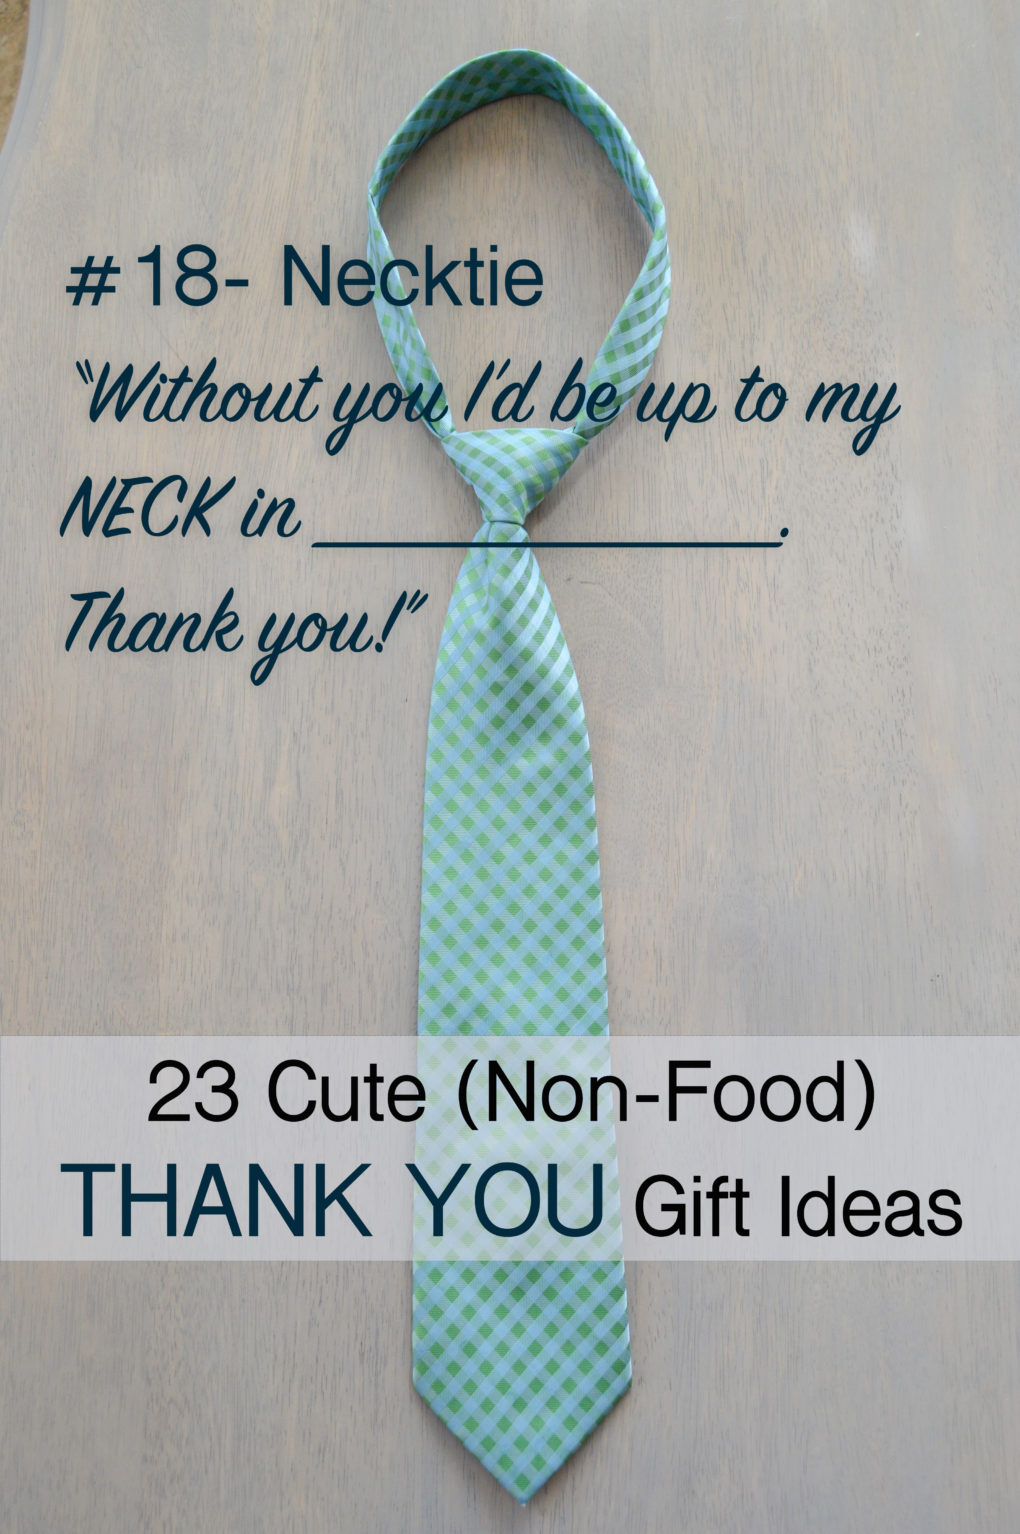 List of 23 cute and creative non-food ways to say thank you. Thank you gift and card ideas that are not food like flowers, candle, tie, etc. Like this punny necktie gift with "Without you I'd be up to my neck in ____. Thank you!" Great thank you ideas for a teacher, coworker, church member, neighbor, husband, family member, or anyone who needs a nice thank you gift.